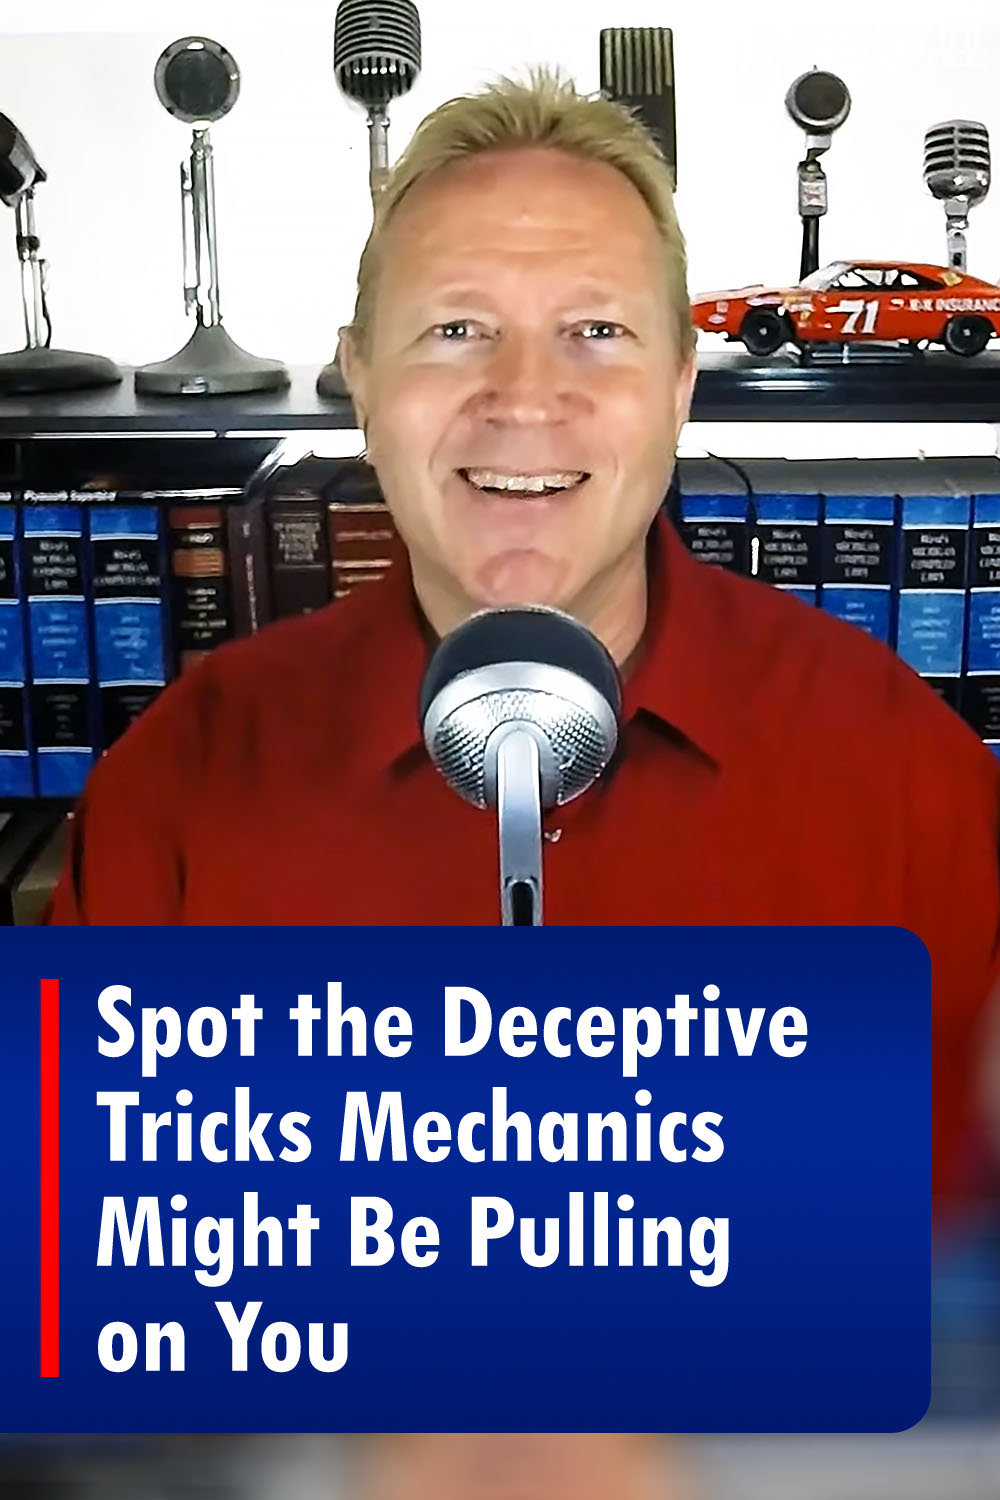 Spot the Deceptive Tricks Mechanics Might Be Pulling on You